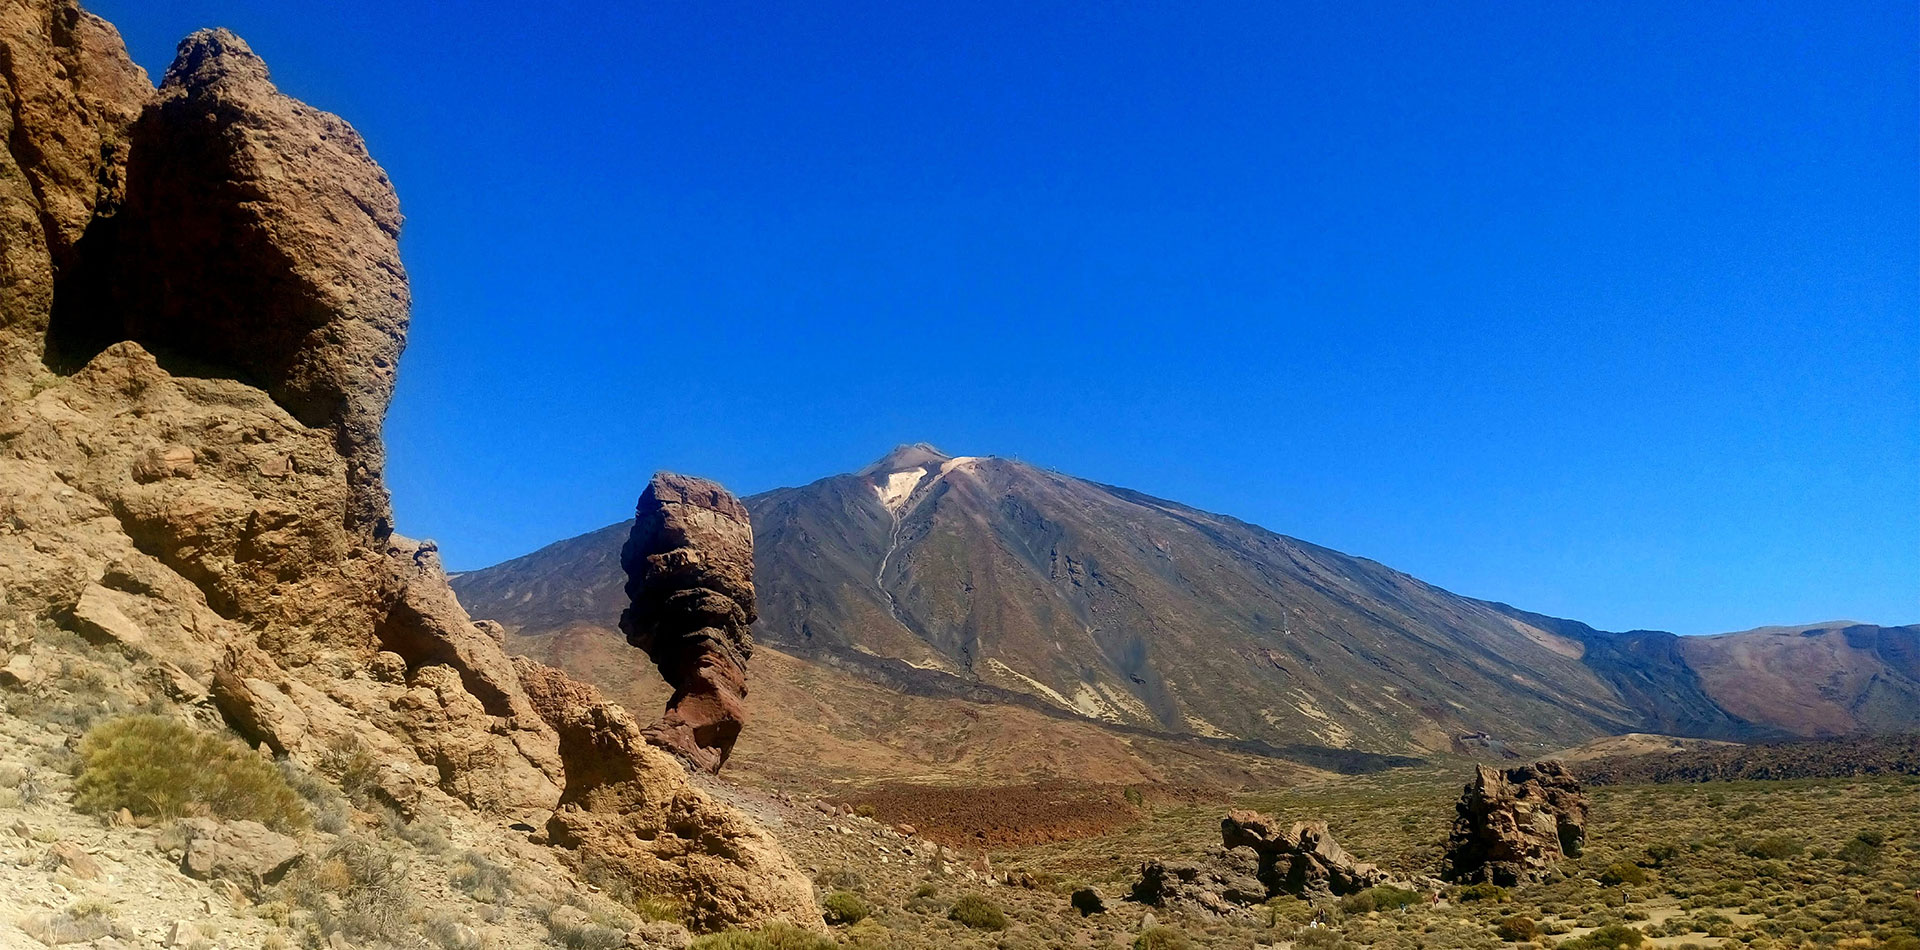 Mount Teide and National park at Tenerife, Canary Islands, Spain